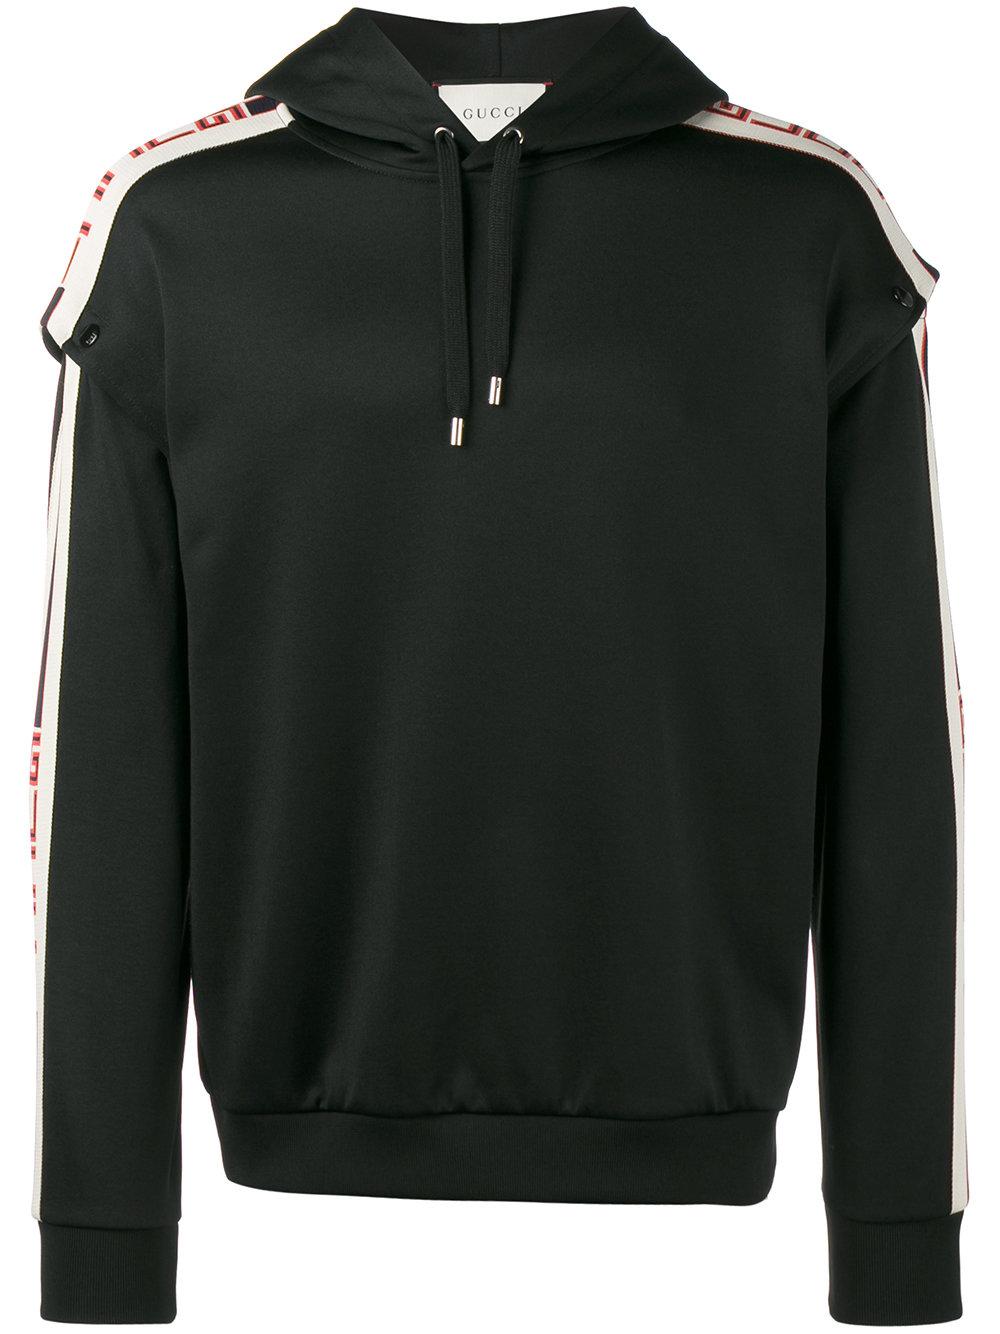 Lyst - Gucci Technical Jersey Hoodie in Black for Men